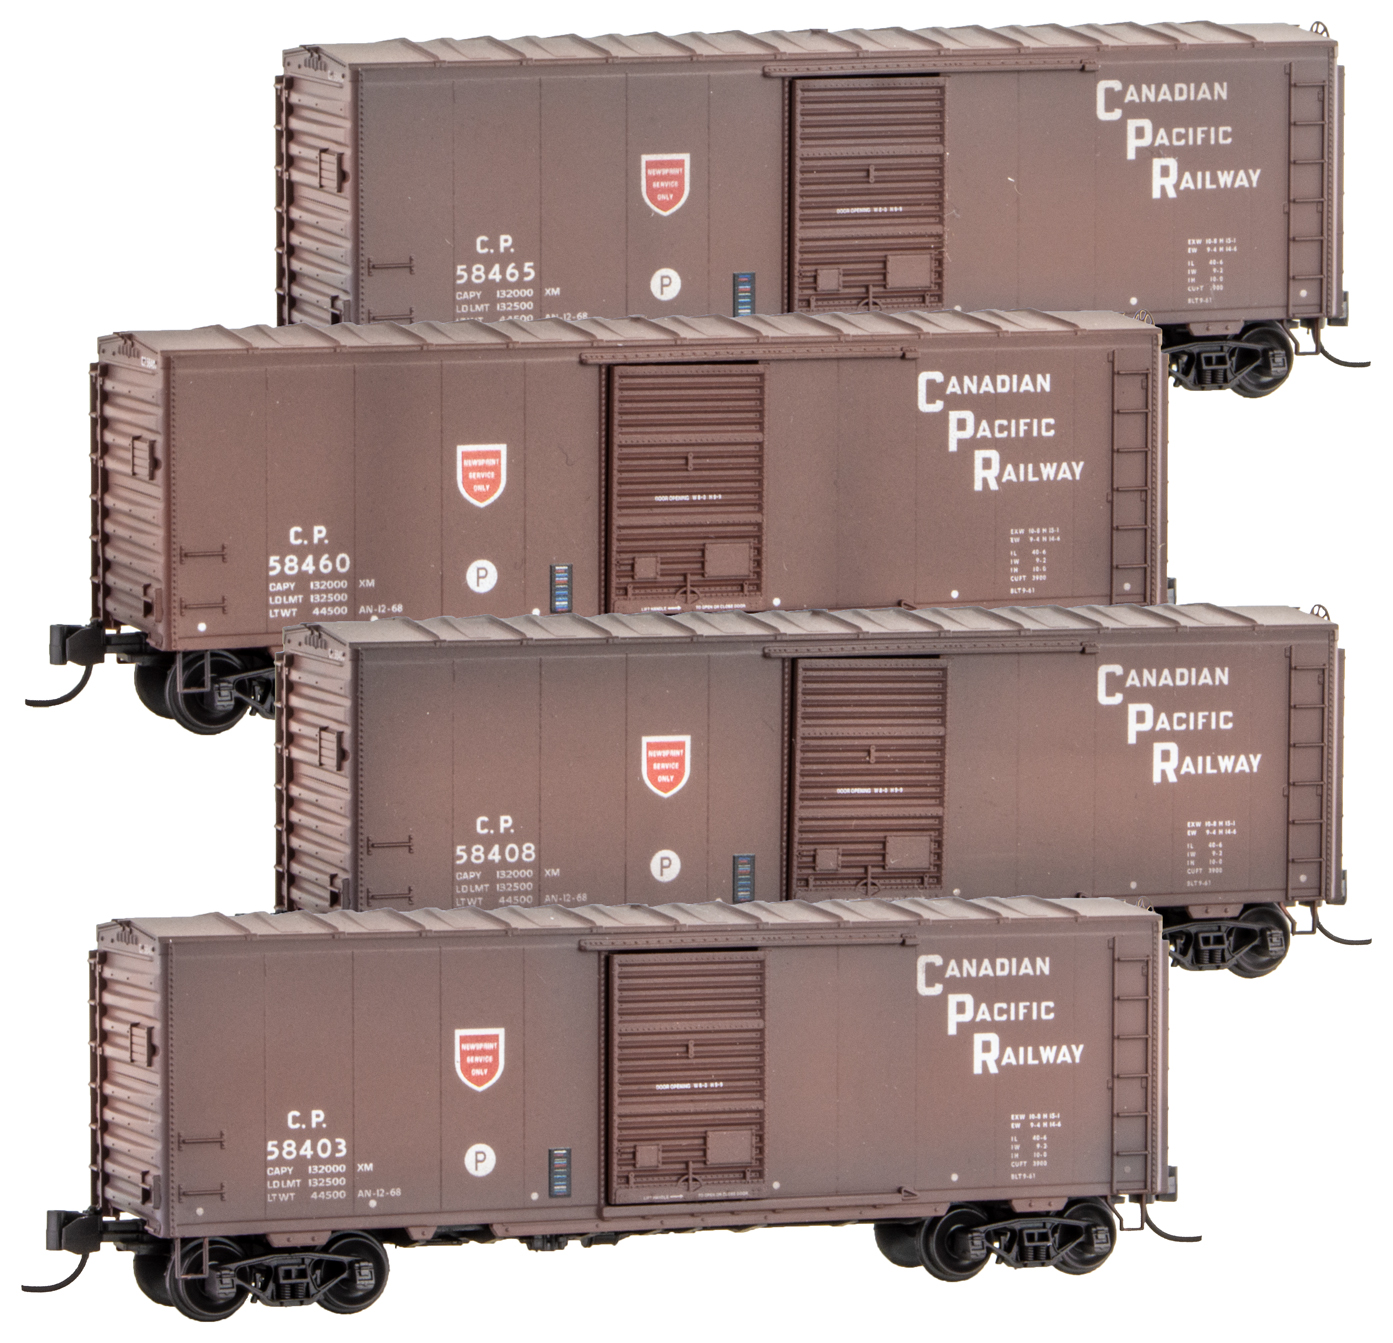 MTL Micro-Trains 22110 Canadian Pacific CP 100190